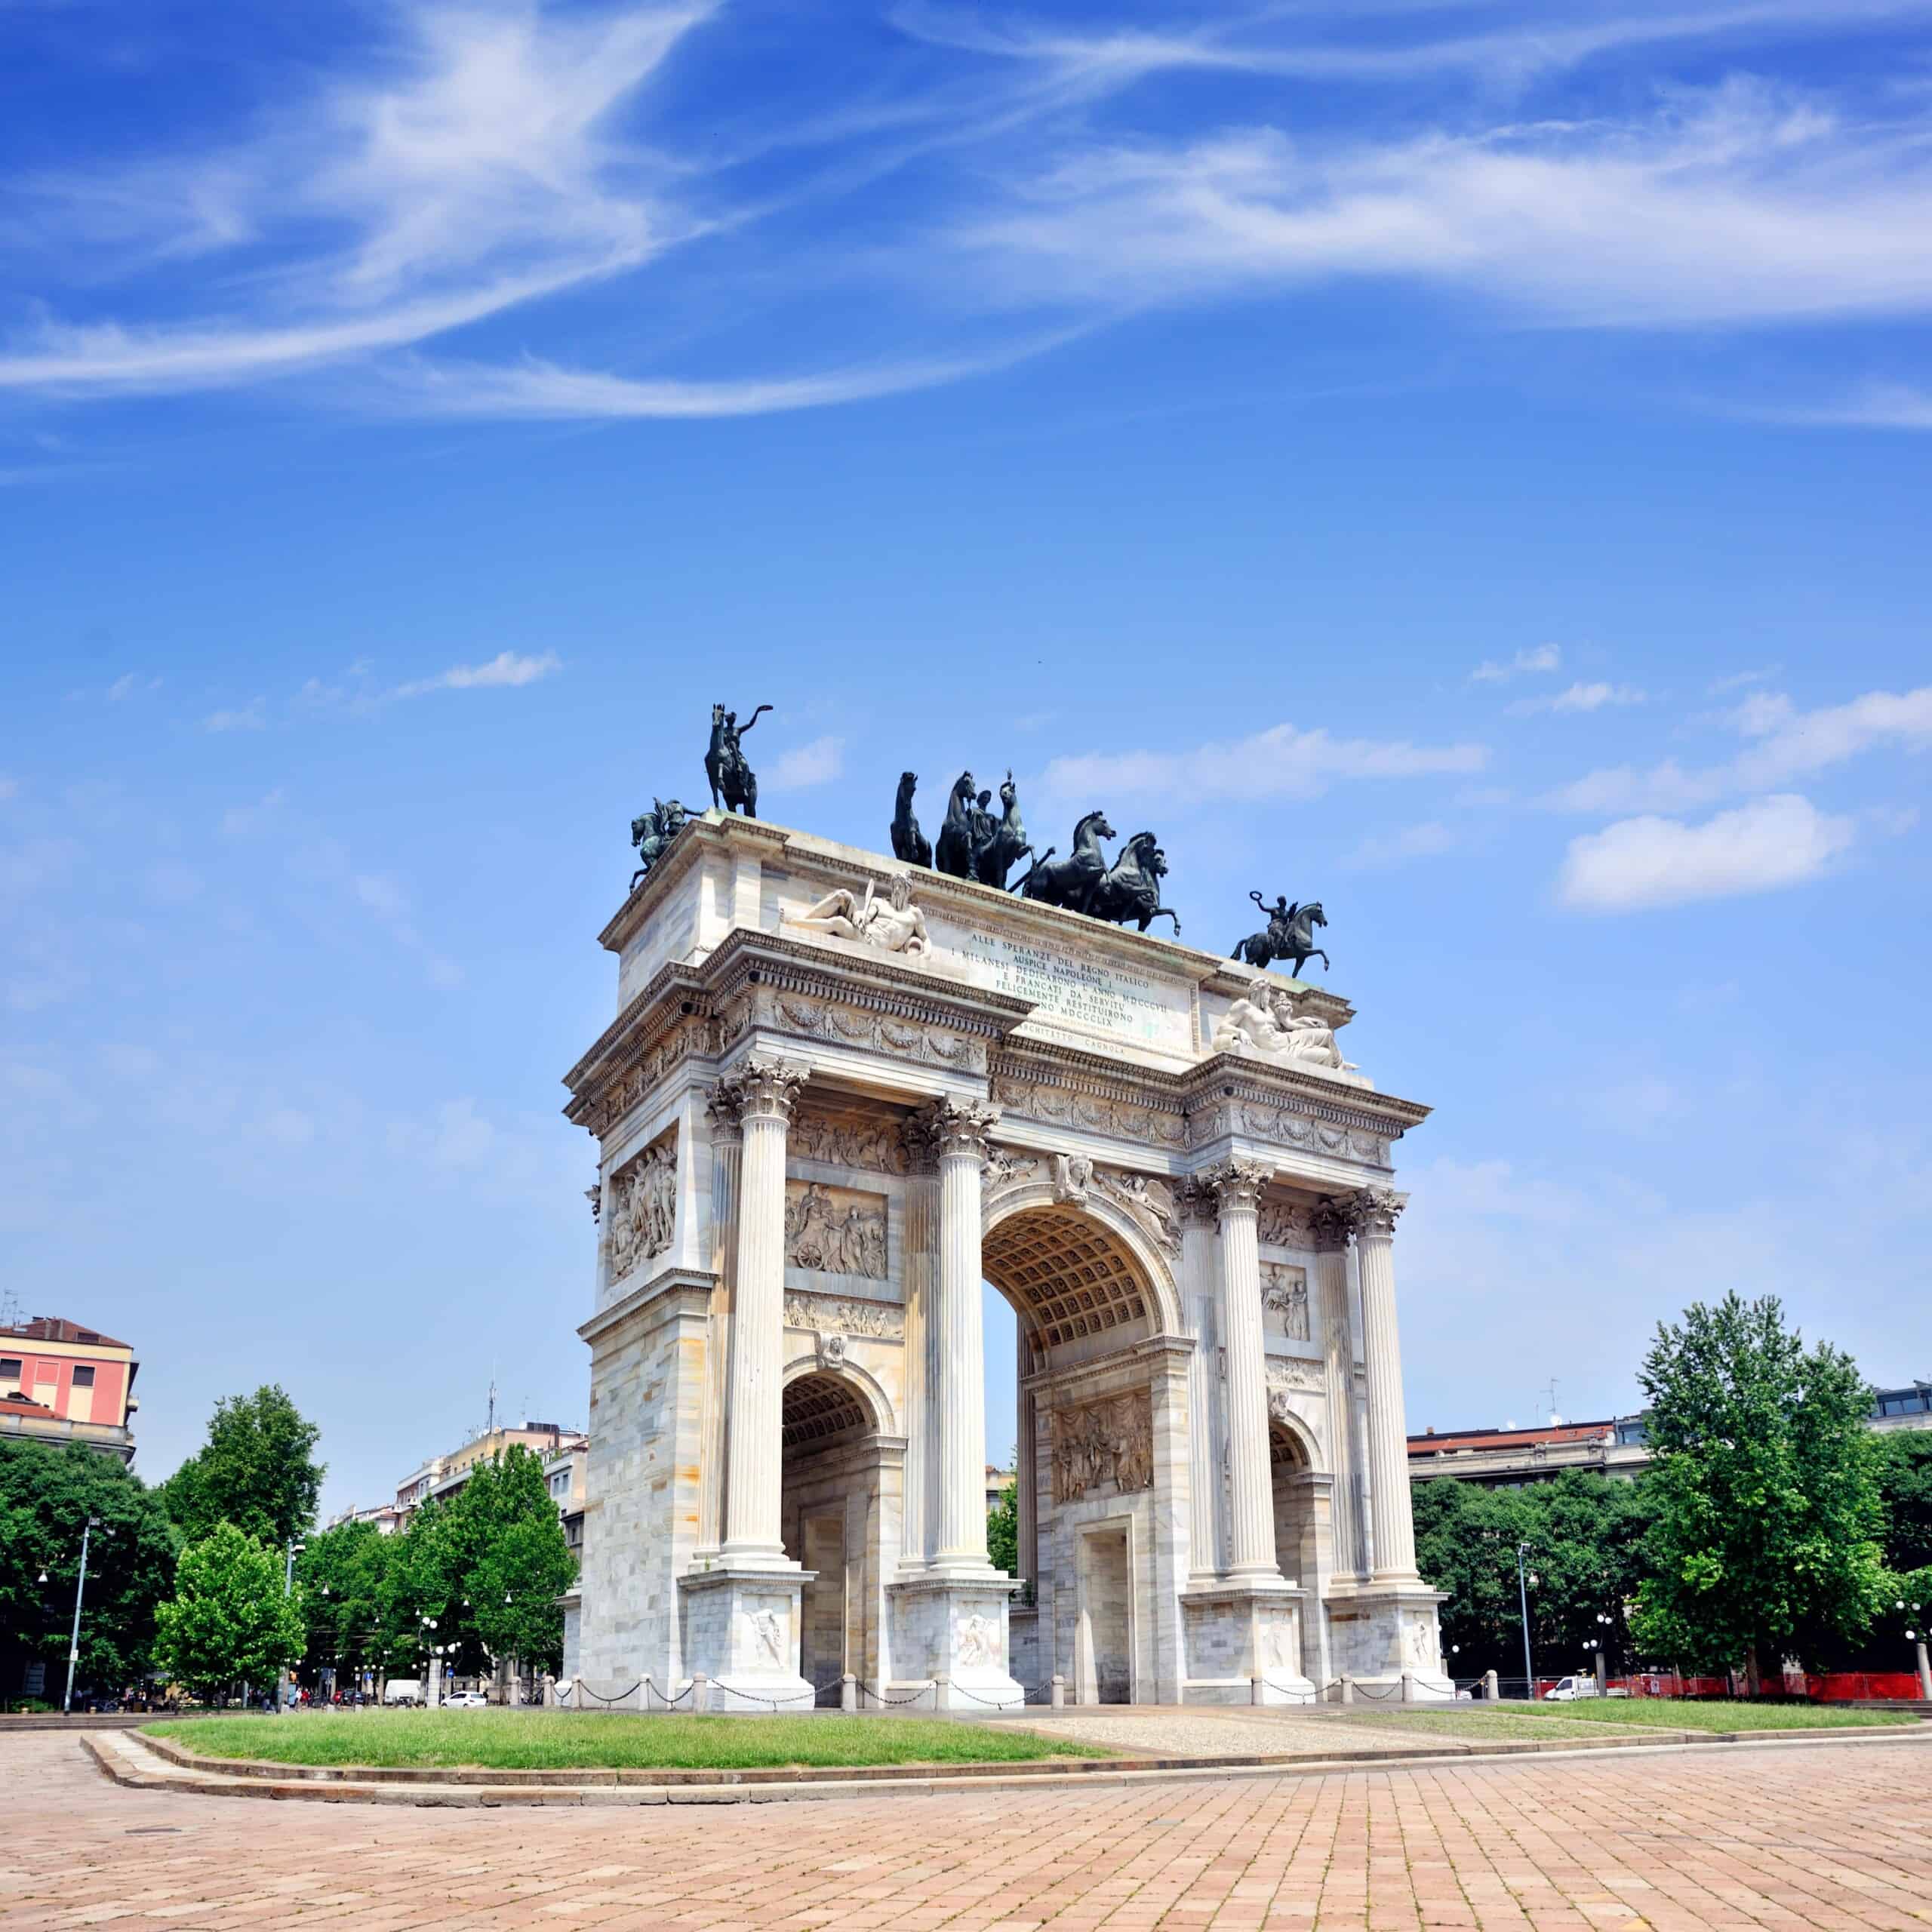 The Peace Arch in Parc Sempione in Milan, Italy